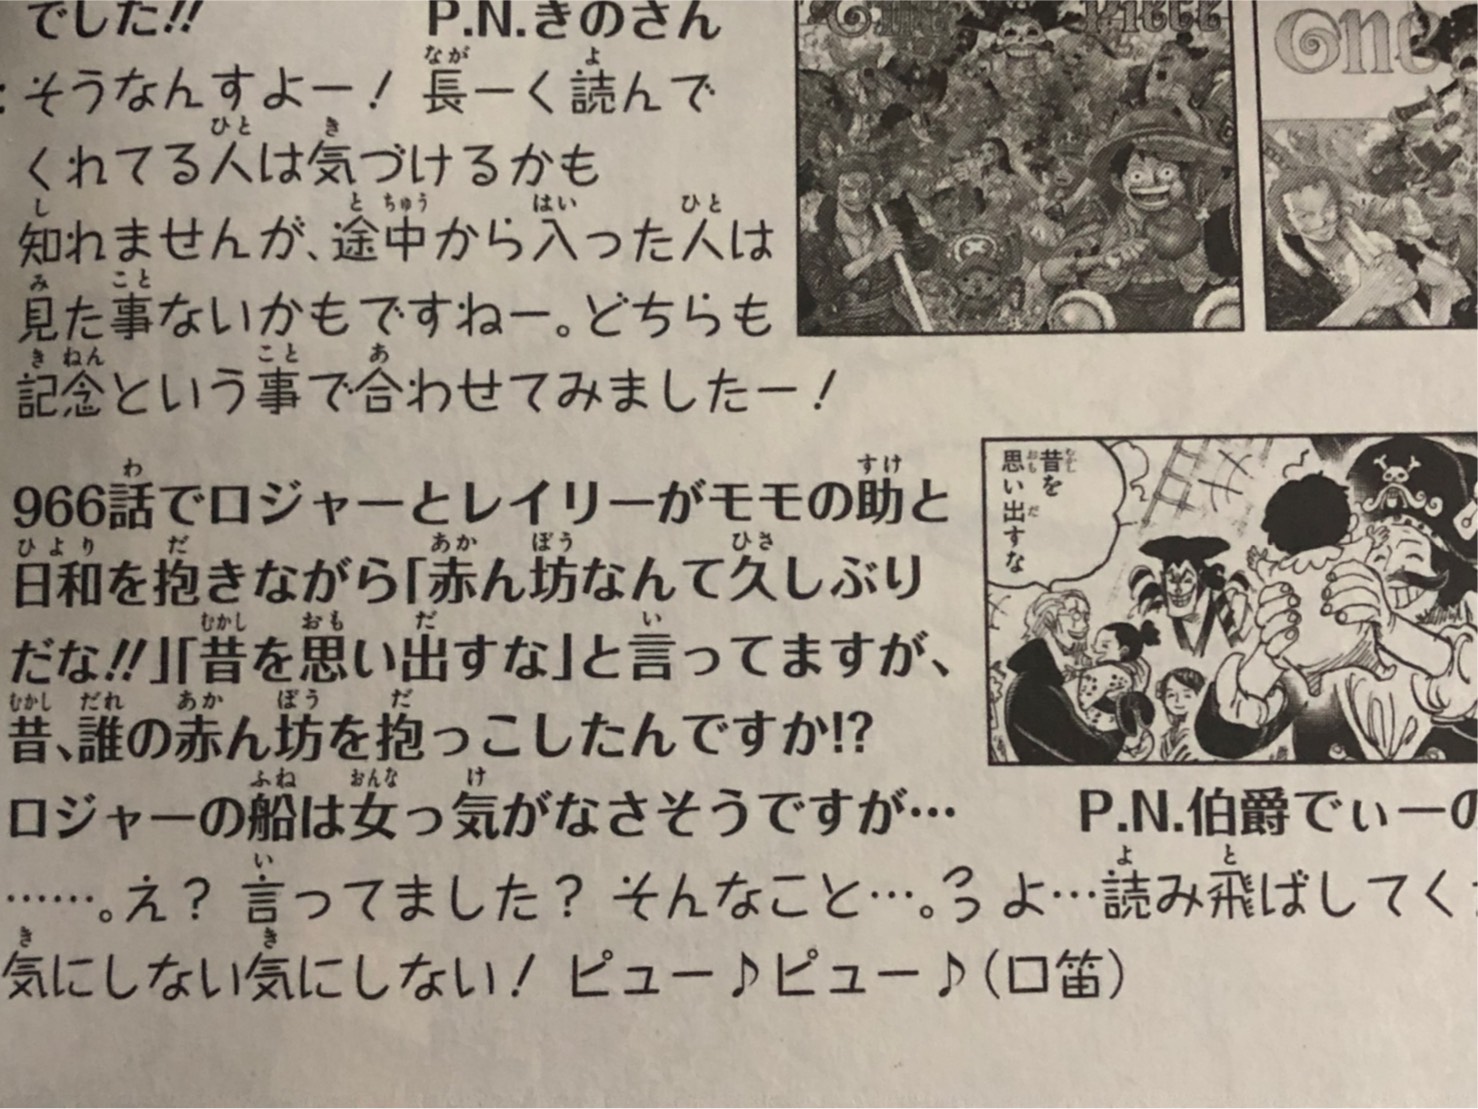 Onepiece第99巻sbs考察 ロジャーとレイリーの赤ん坊発言 赤太郎とバギ次郎確定 ワンピース考察 甲塚誓ノ介のいい芝居してますね Part 2